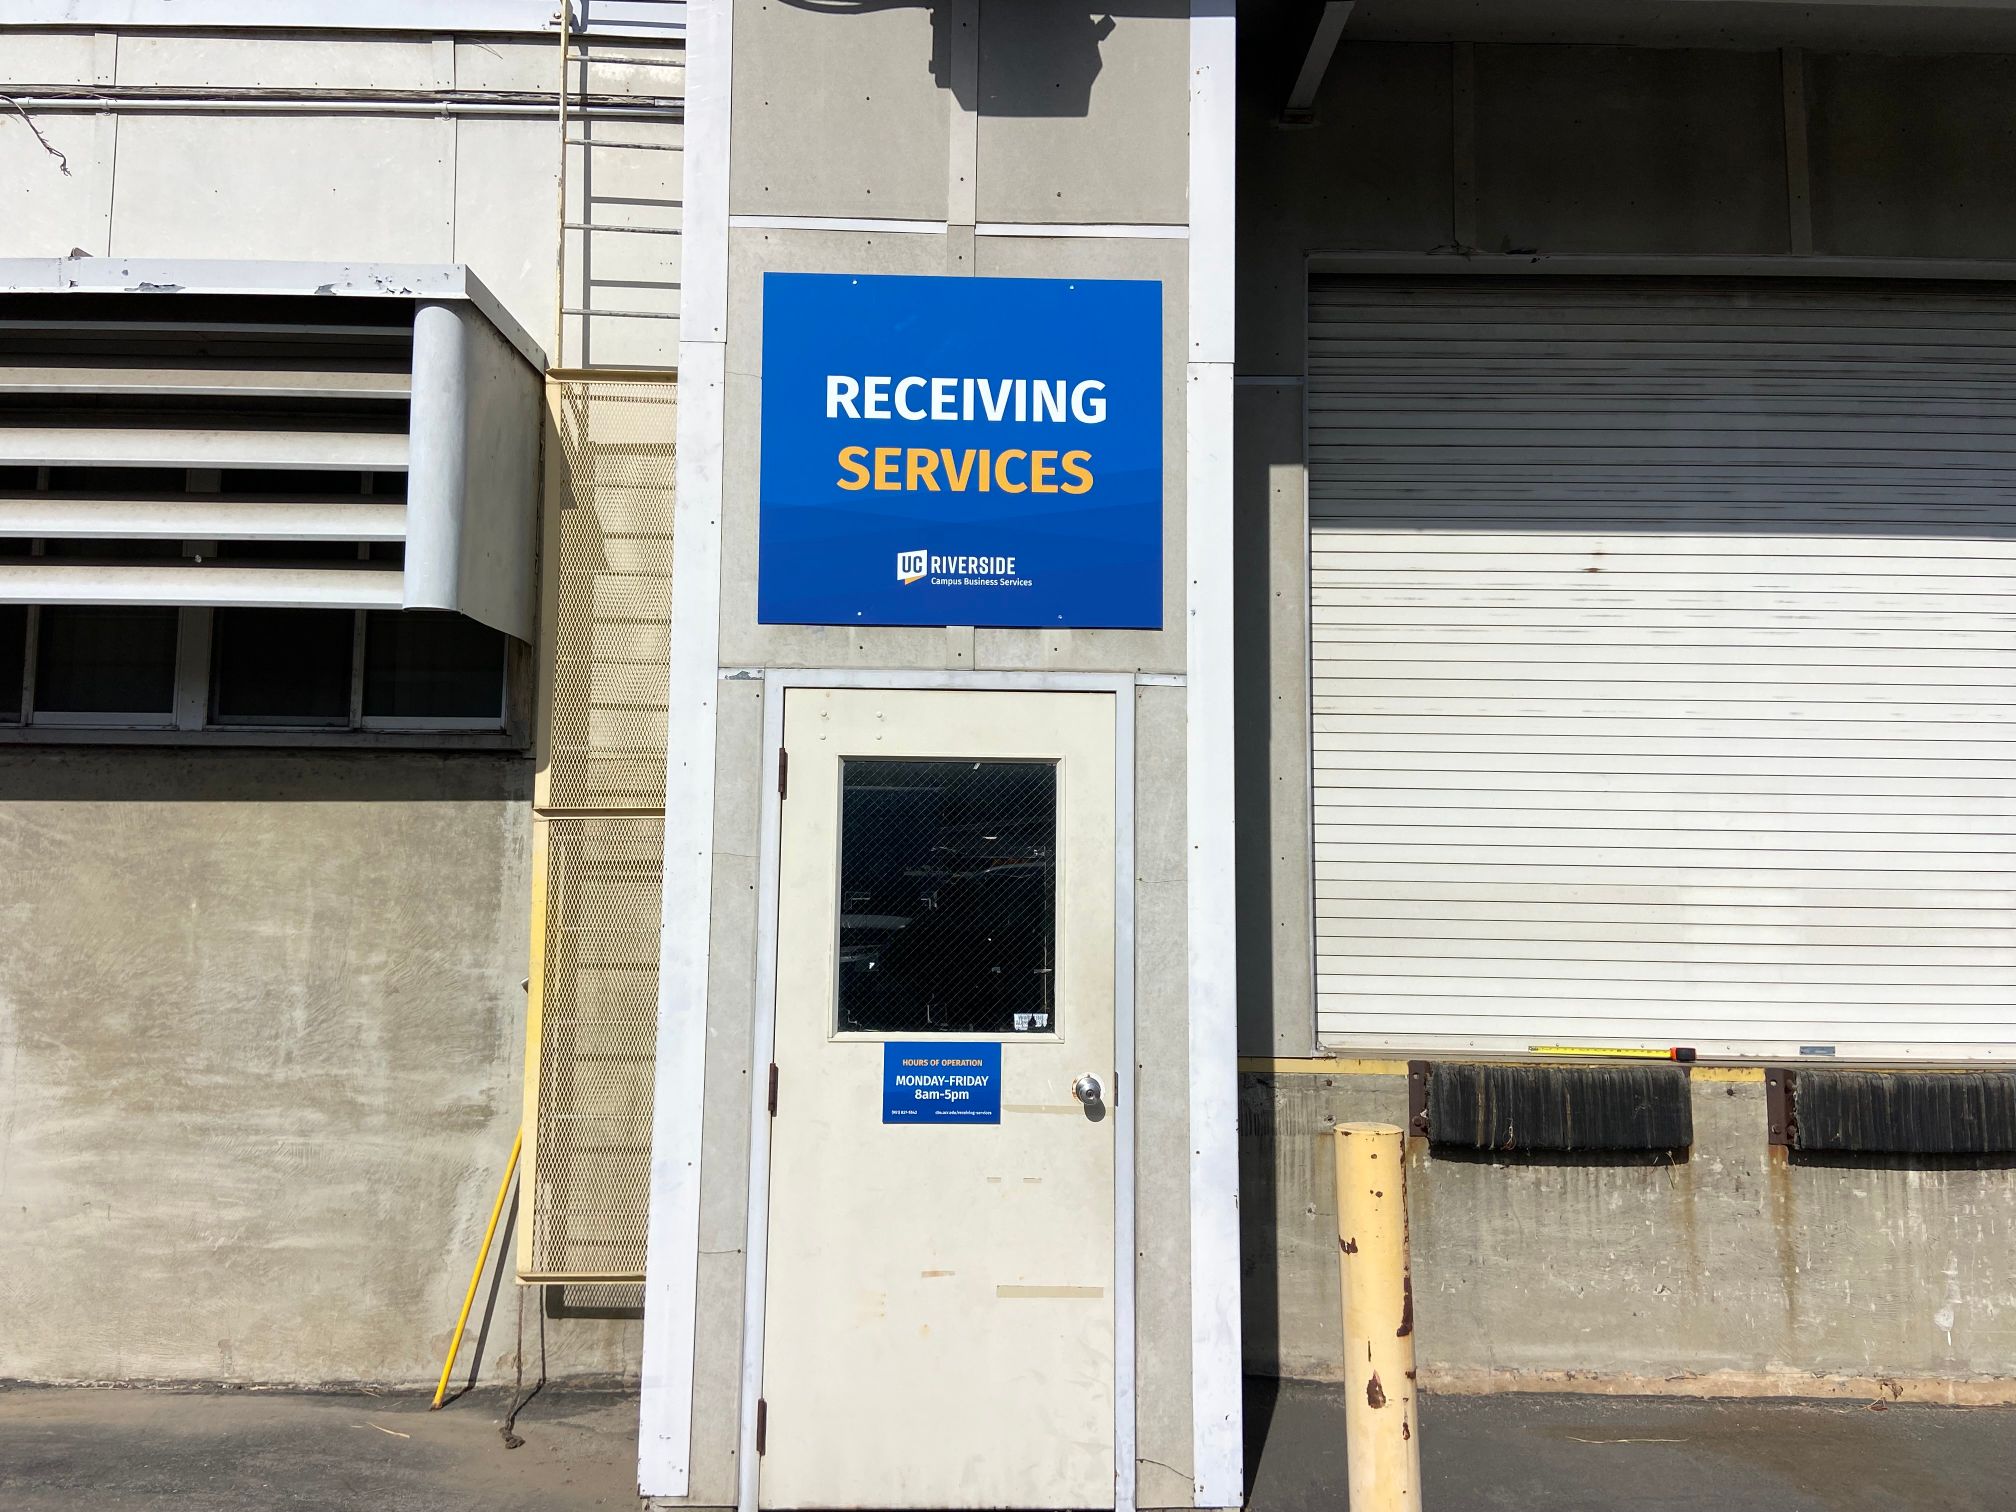 New Facility Signs for UCR  in Riverside Direct Visitors and Guests